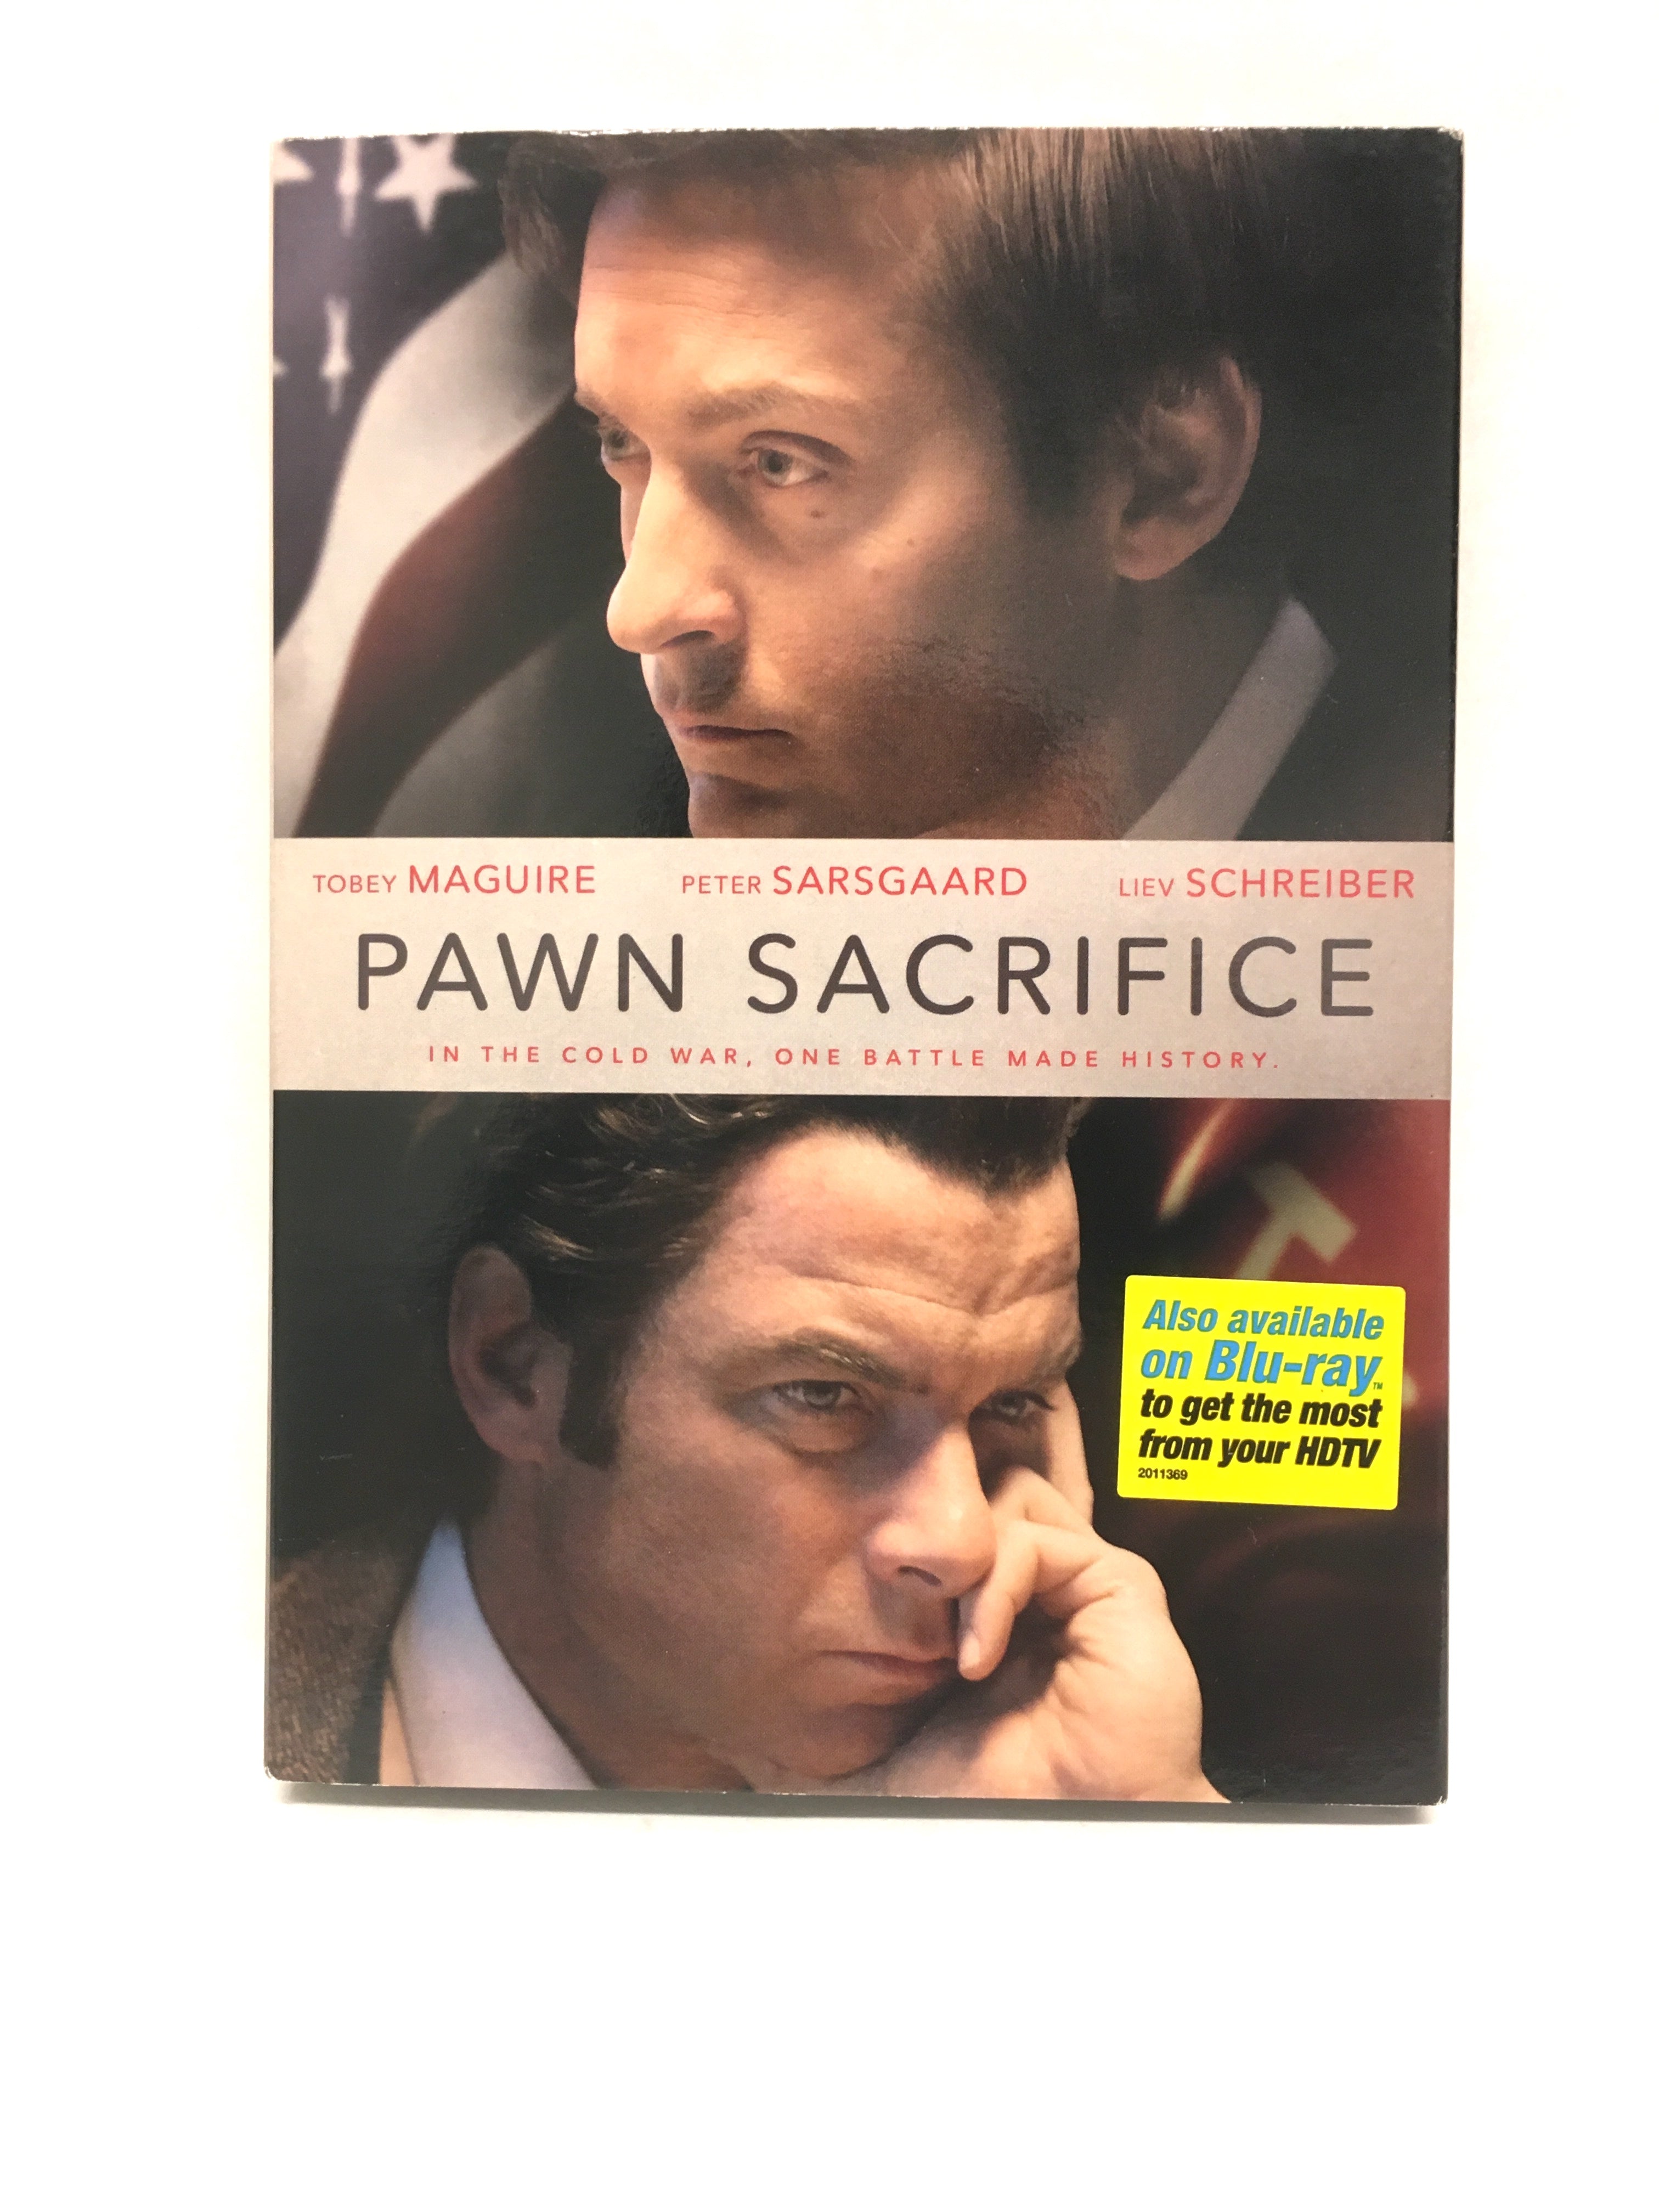 Pawn Sacrifice: Cold War chess film timelier than ever - The Globe and Mail